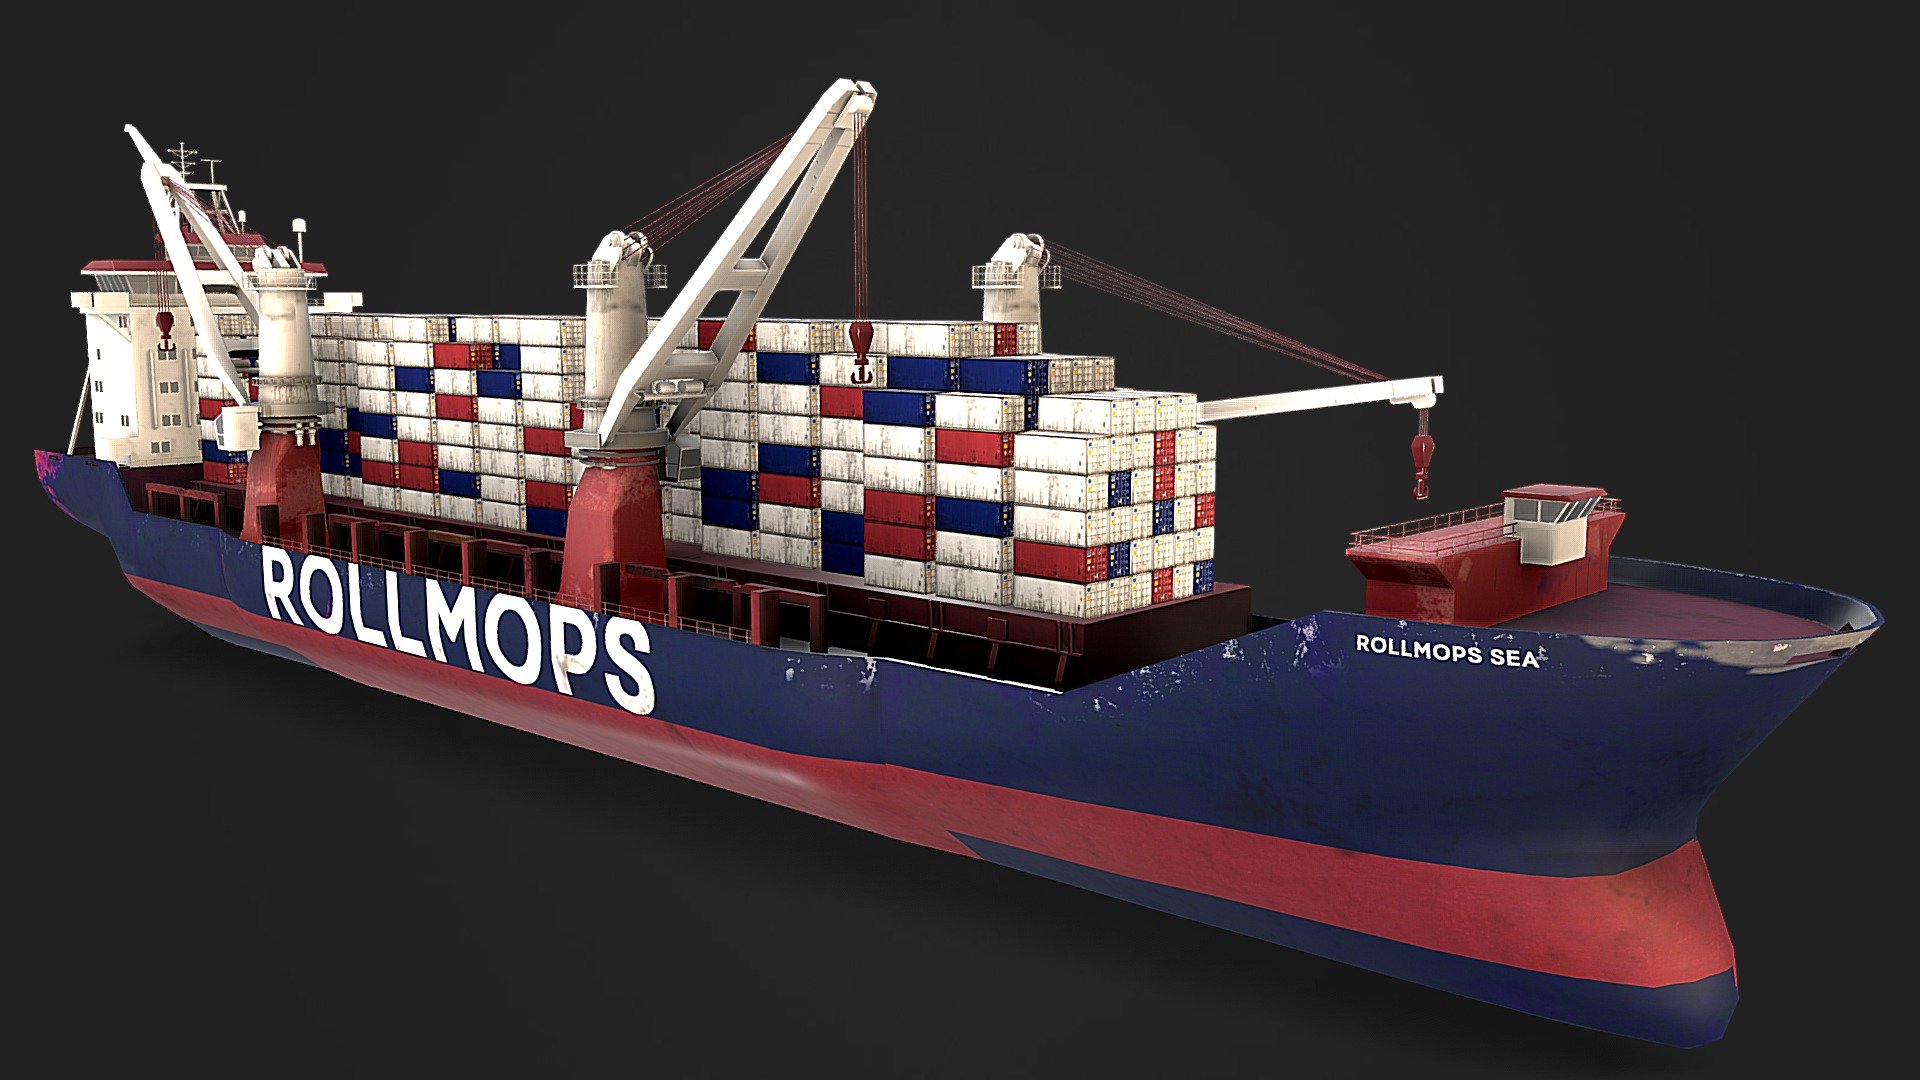 Realtime optimized, low poly Cargo Ship with Rollmops livery (fictive). As heavy lift multipurpose cargo ship it can carry virtually any load, not just containers. Complete model with containers has a triangle count of 35641 tris, without containers 25393 tris. Included are PBR specular workflow ready textures in native 4096x4096 px. Model is made in real world scale meters with a lenght of appr. 200 m. View the complete Low Poly Cargo Ship collection here: https://skfb.ly/oRL6I - Low Poly Cargo Ship - Rollmops Livery - Buy Royalty Free 3D model by cgamp 3d model